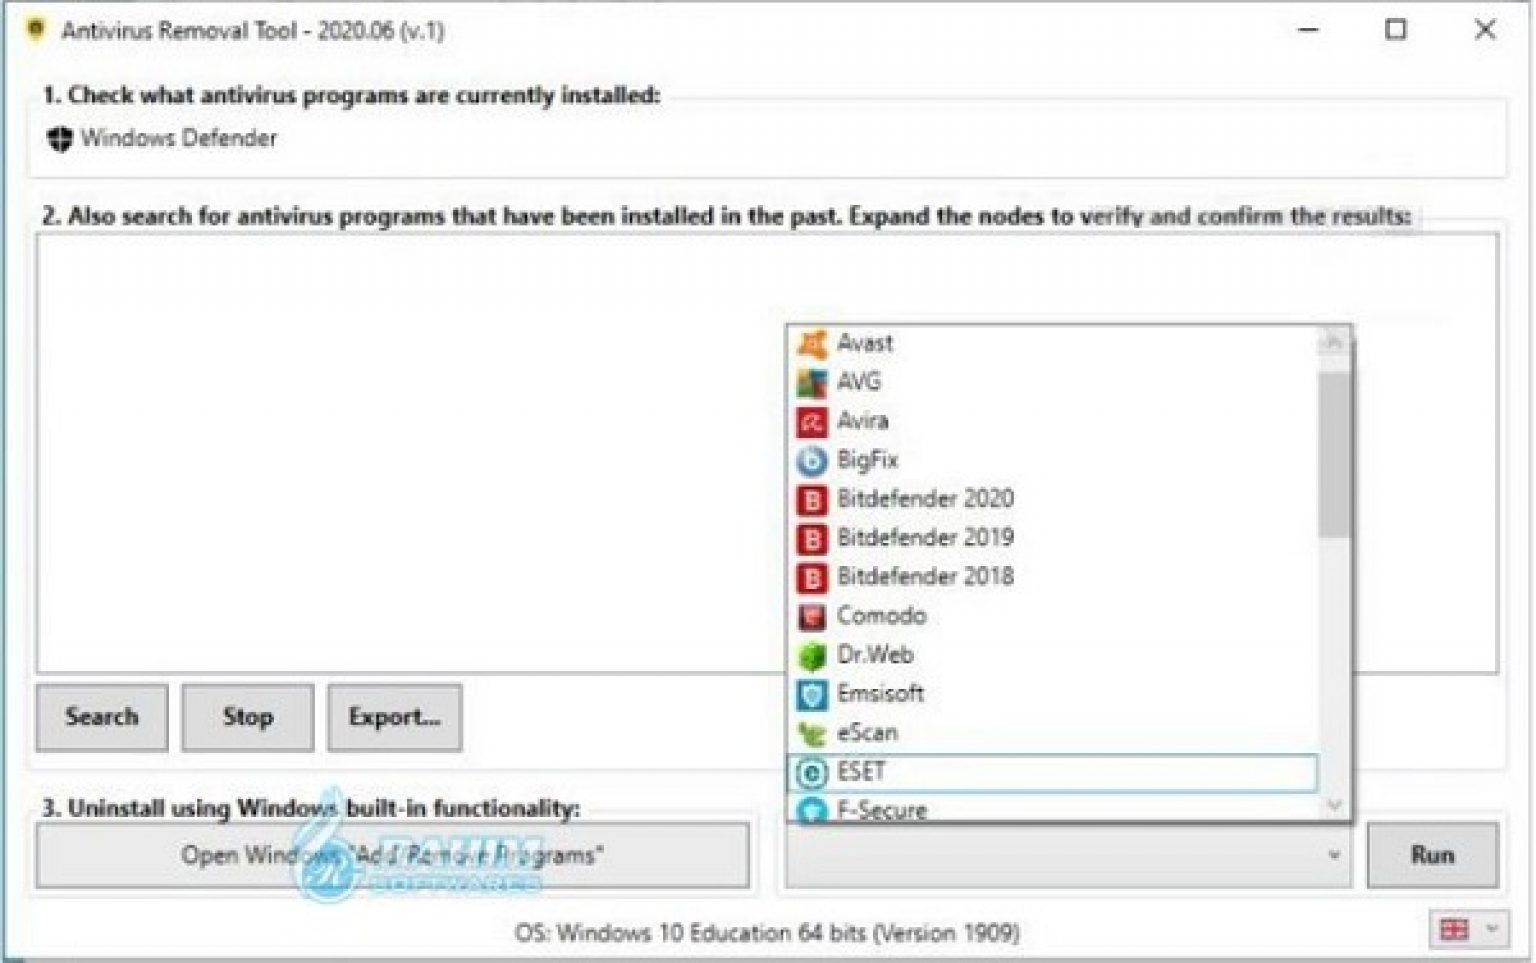 Antivirus Removal Tool 2023.11 (v.1) download the new for windows